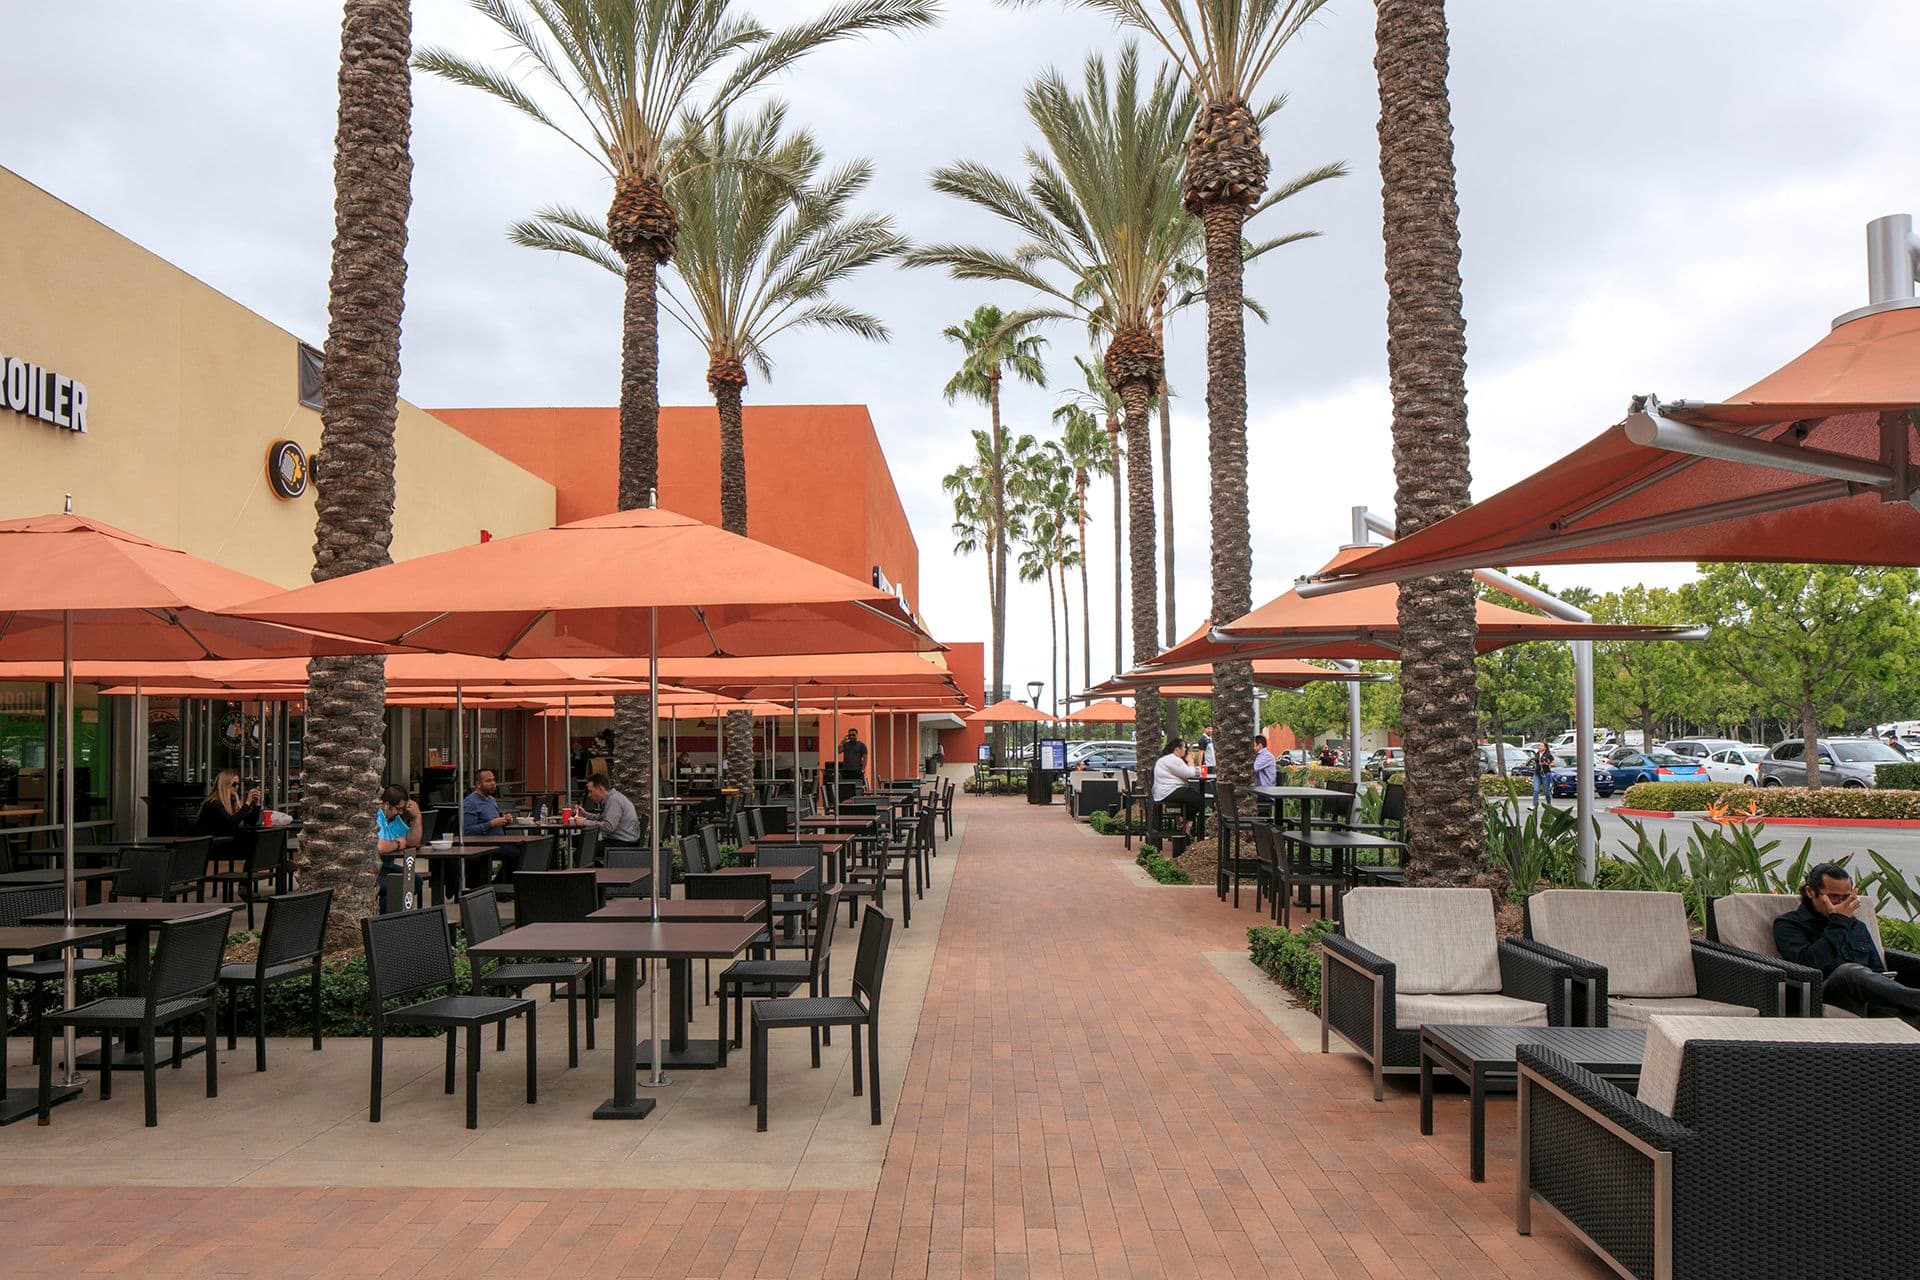 Exterior view of food courtyard at Sand Canyon Plaza at Irvine Spectrum in Irvine, CA.